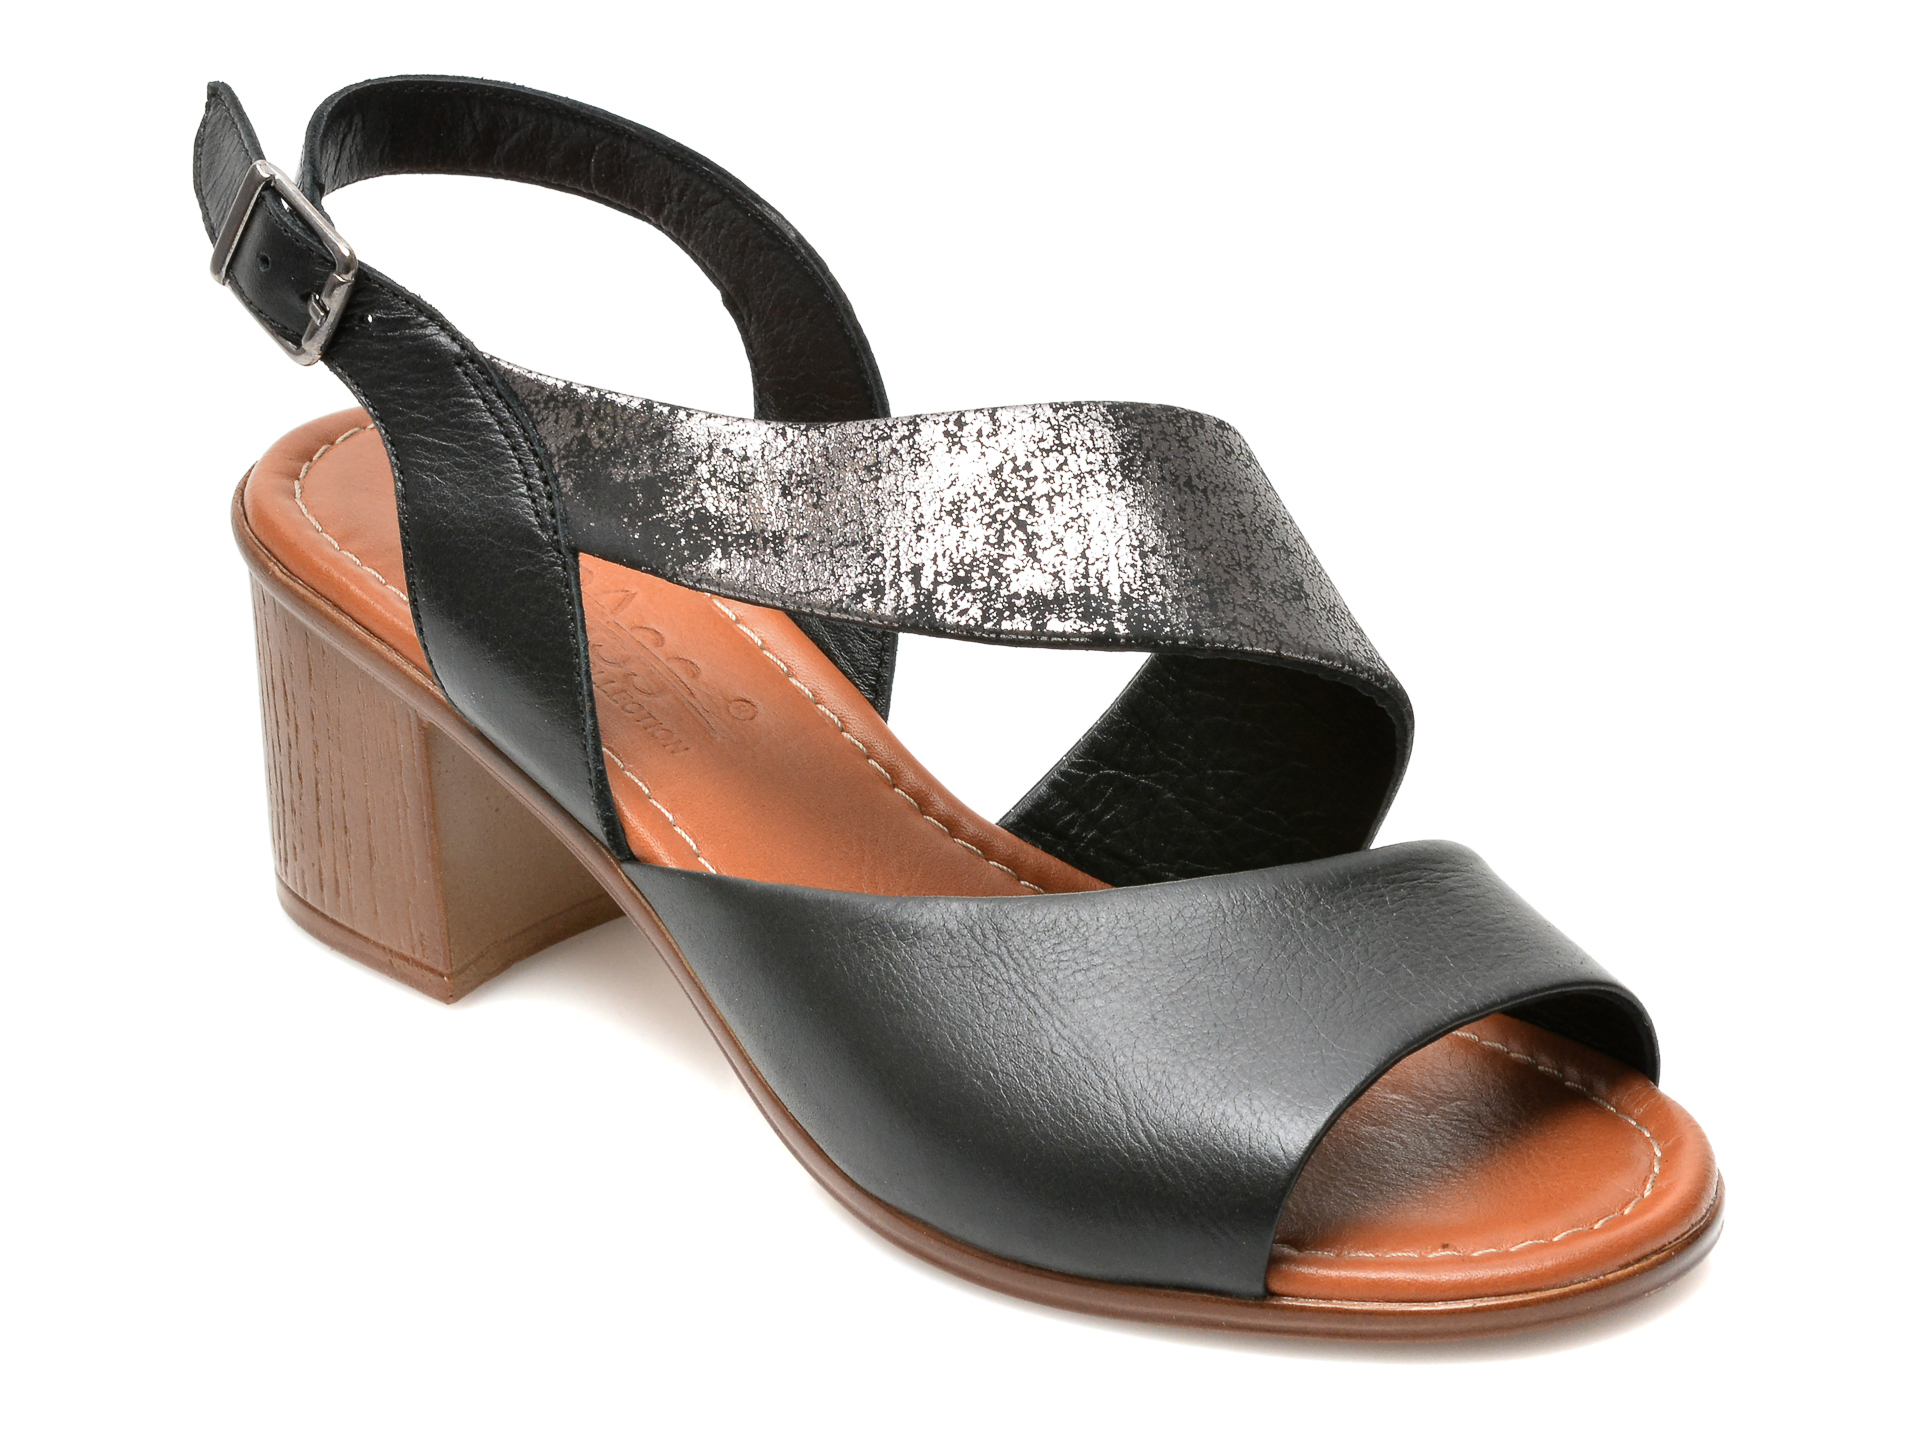 Sandale PASS COLLECTION negre, 632, din piele naturala otter.ro